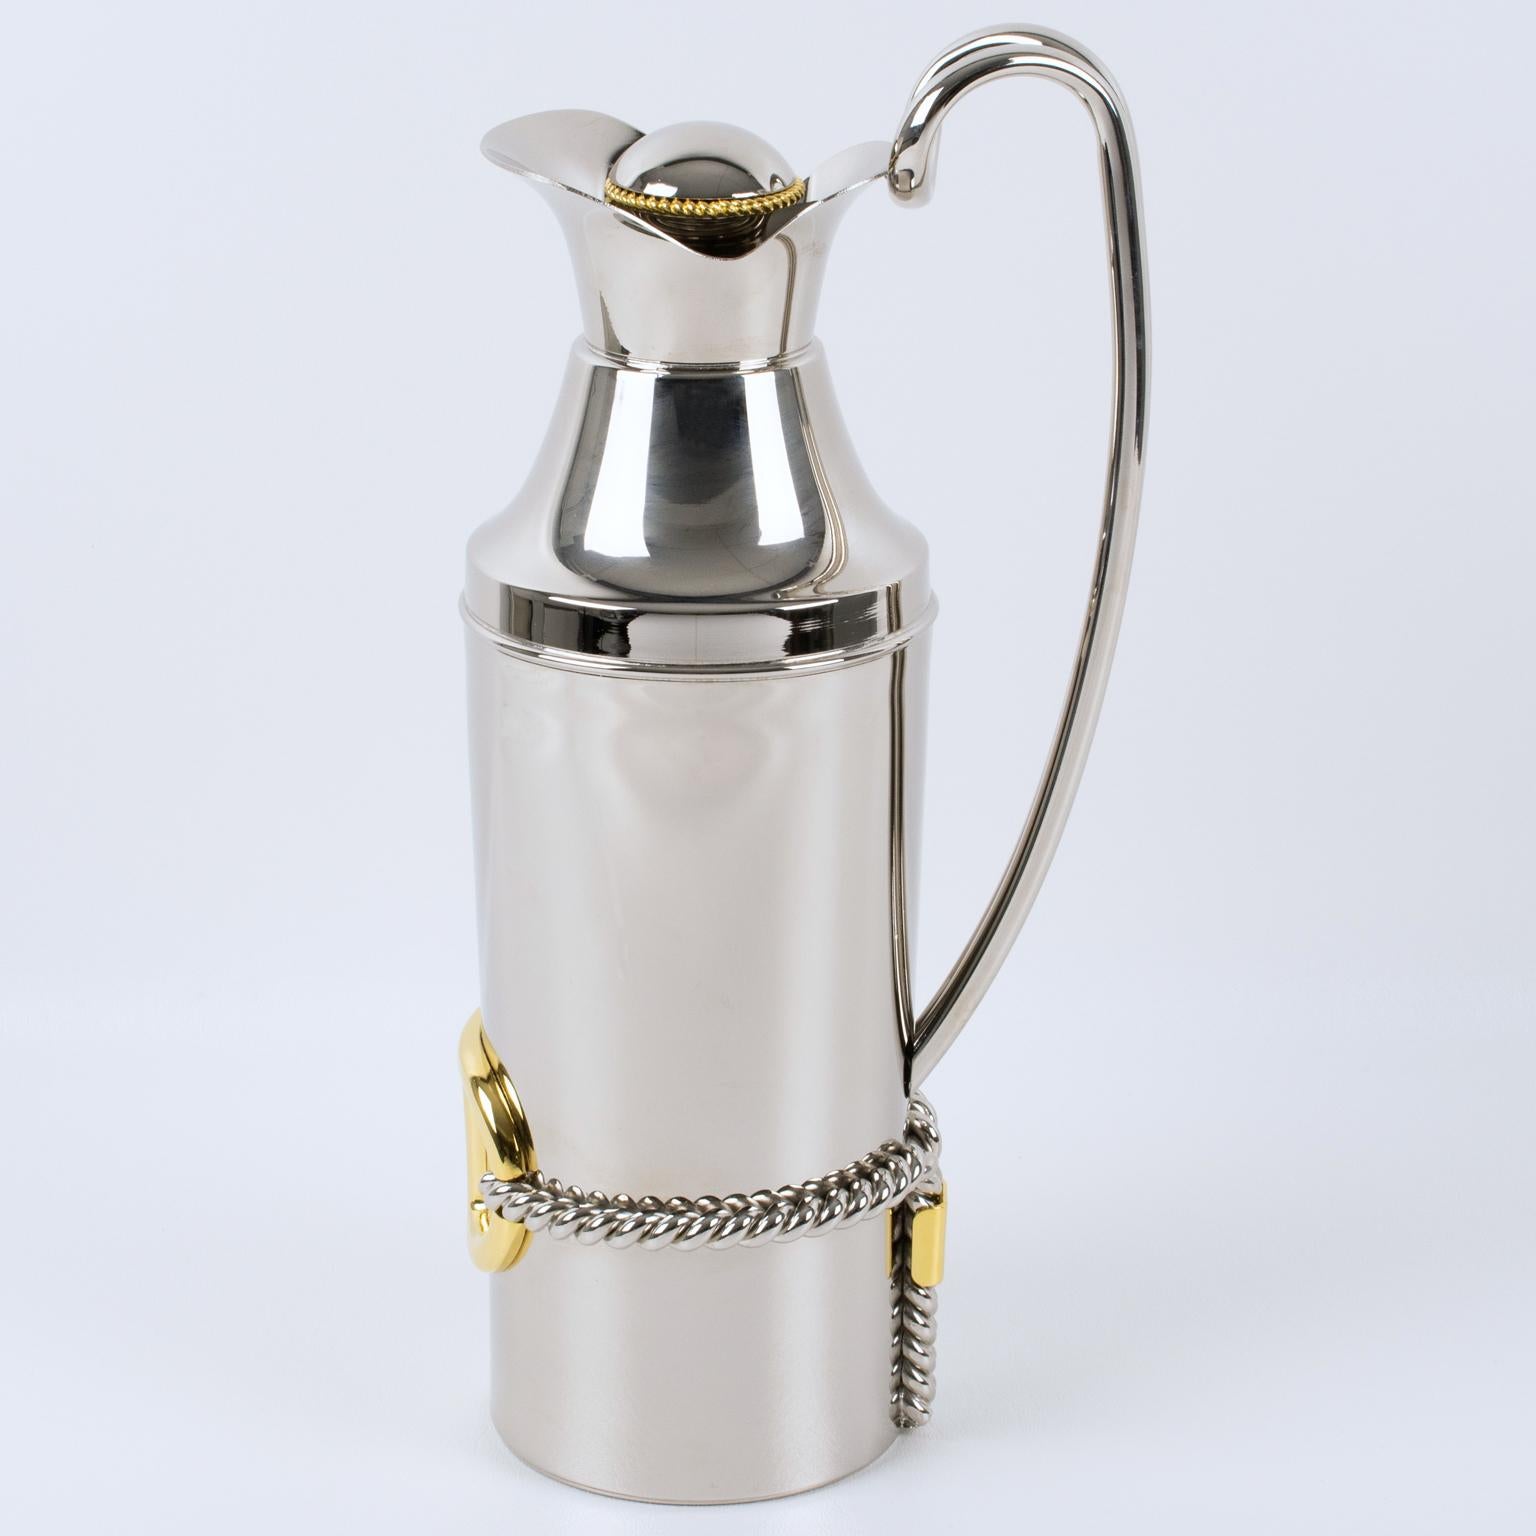 Gucci Italy Silvered and Gilt Metal Barware Thermos Insulated Decanter with Rope In Excellent Condition For Sale In Atlanta, GA